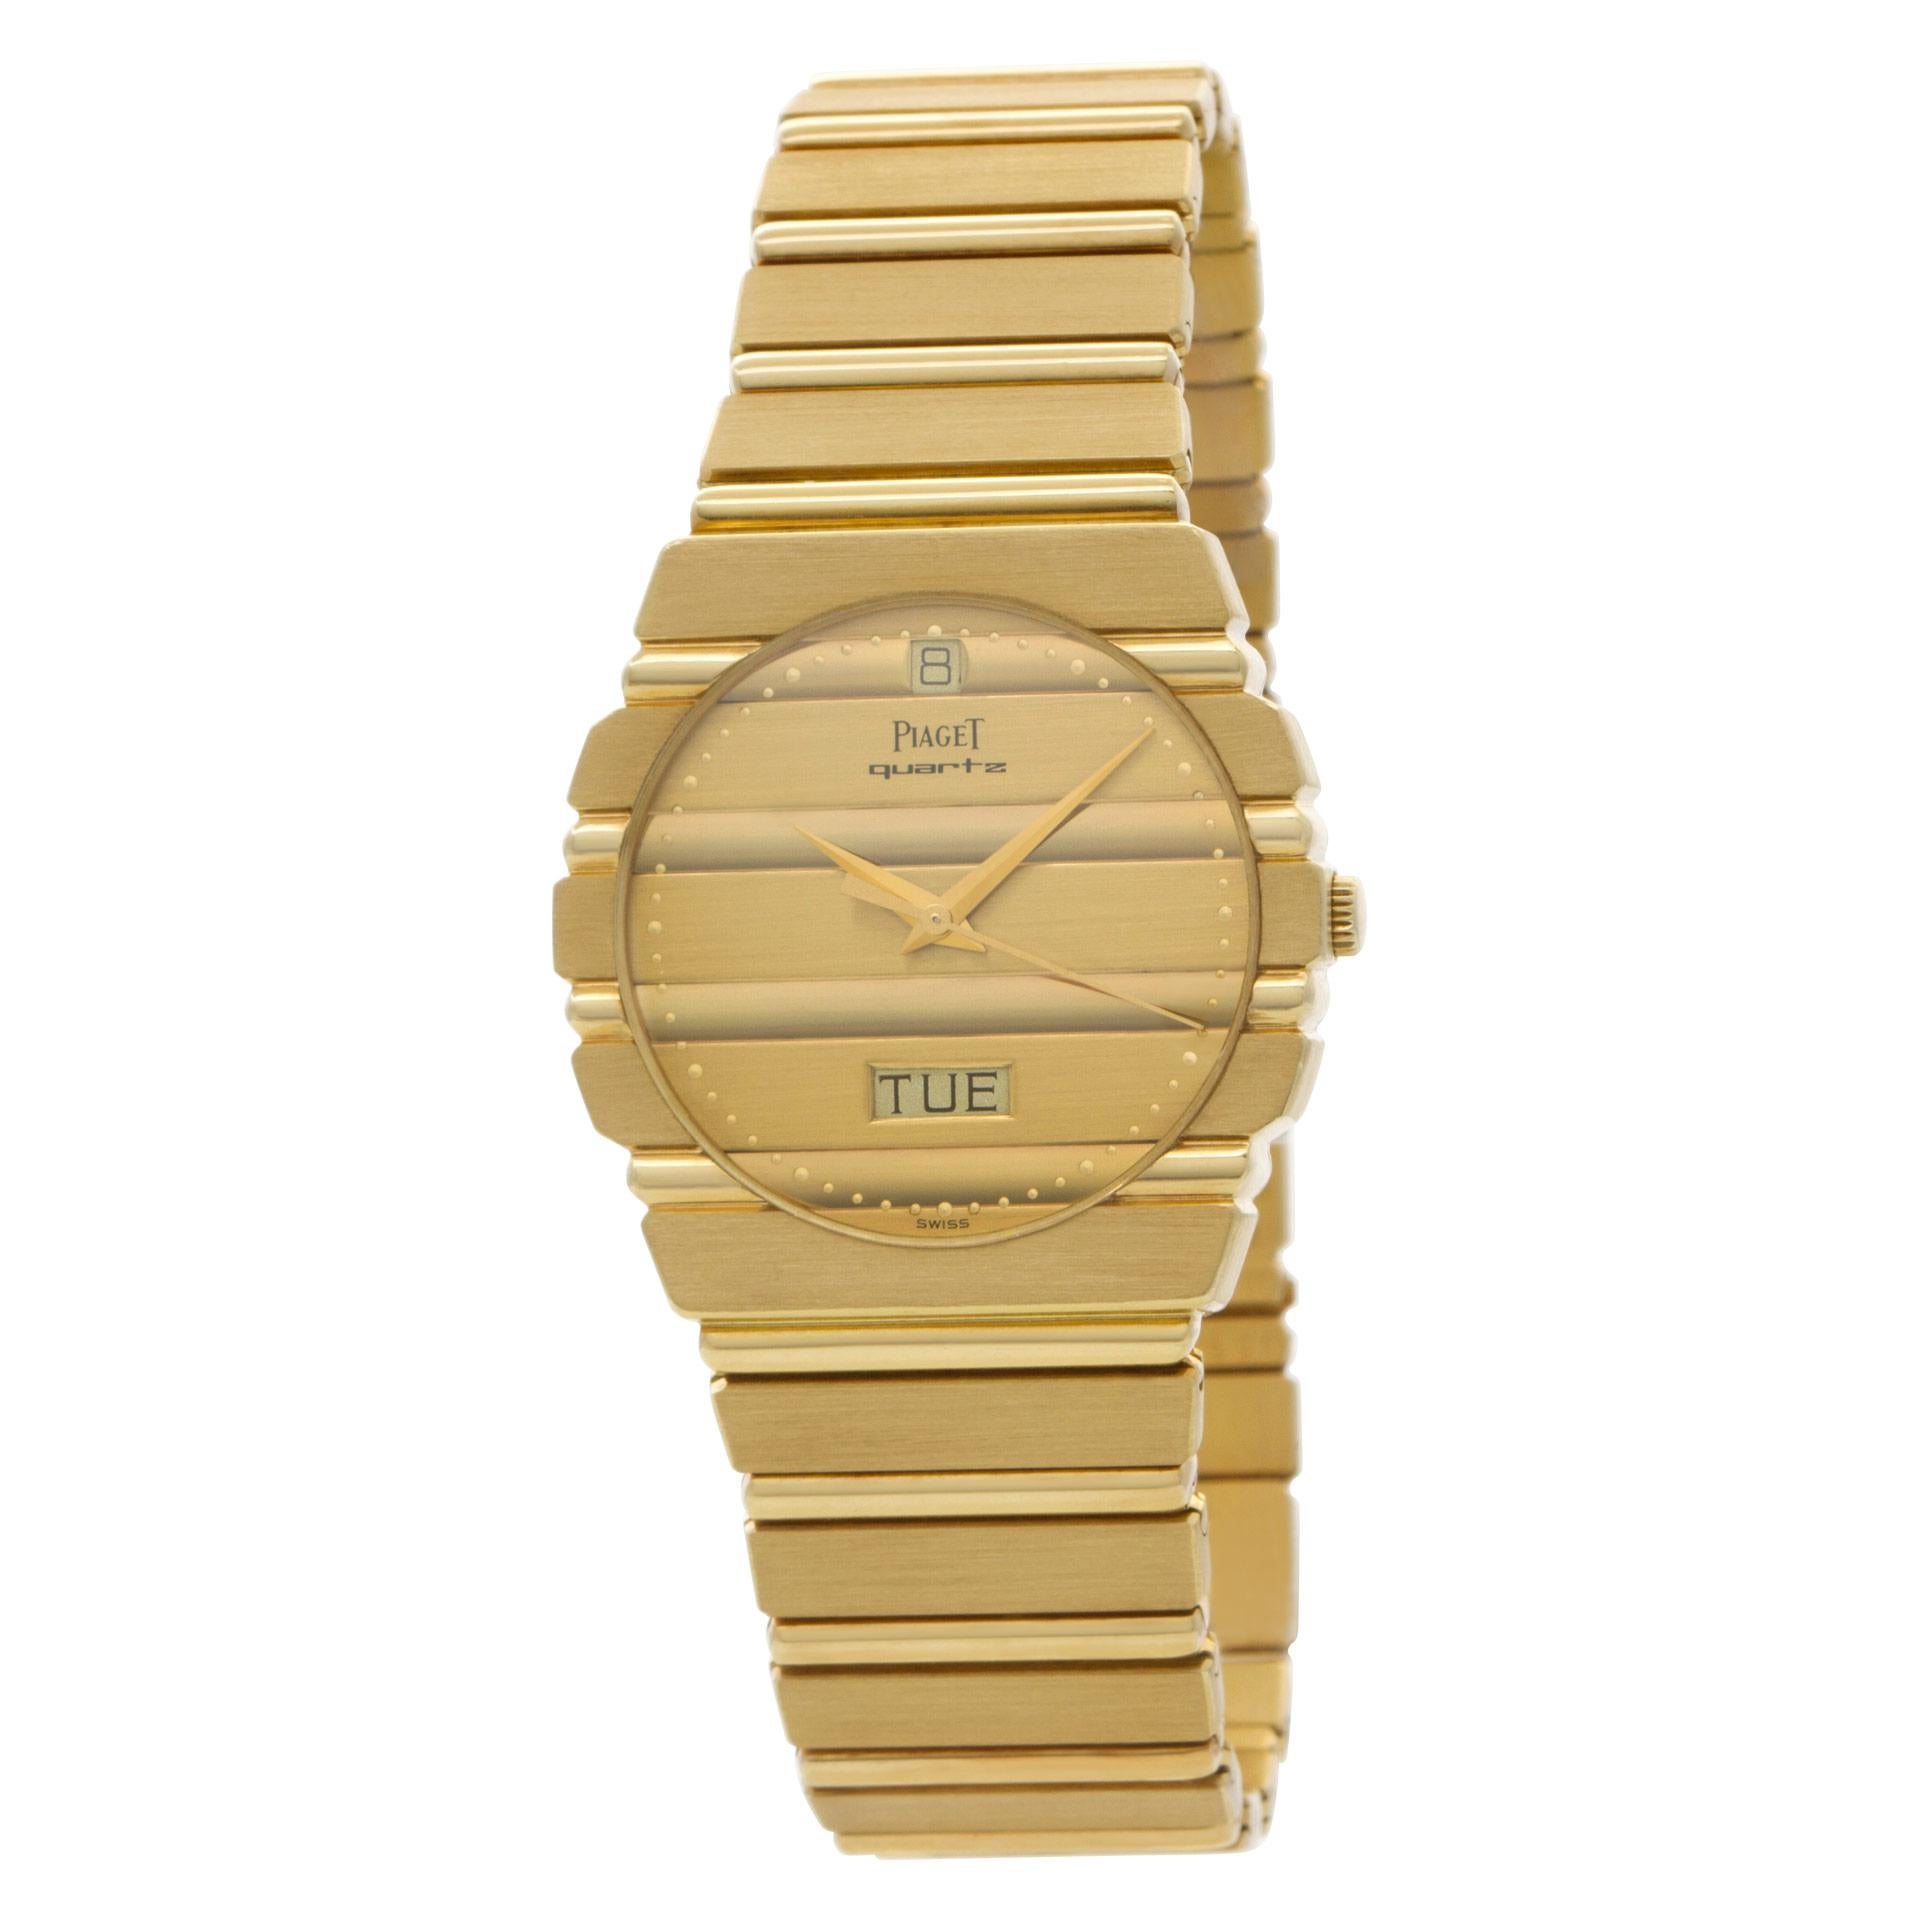 Piaget Polo in 18k yellow gold. Quartz w/ sweep seconds, date and day. 31 mm case size. Ref 15562 C 701. Circa 1980s. Fine Pre-owned Piaget Watch.  Certified preowned Classic Piaget Polo 15562 C 701 watch is made out of yellow gold on a 18k bracelet